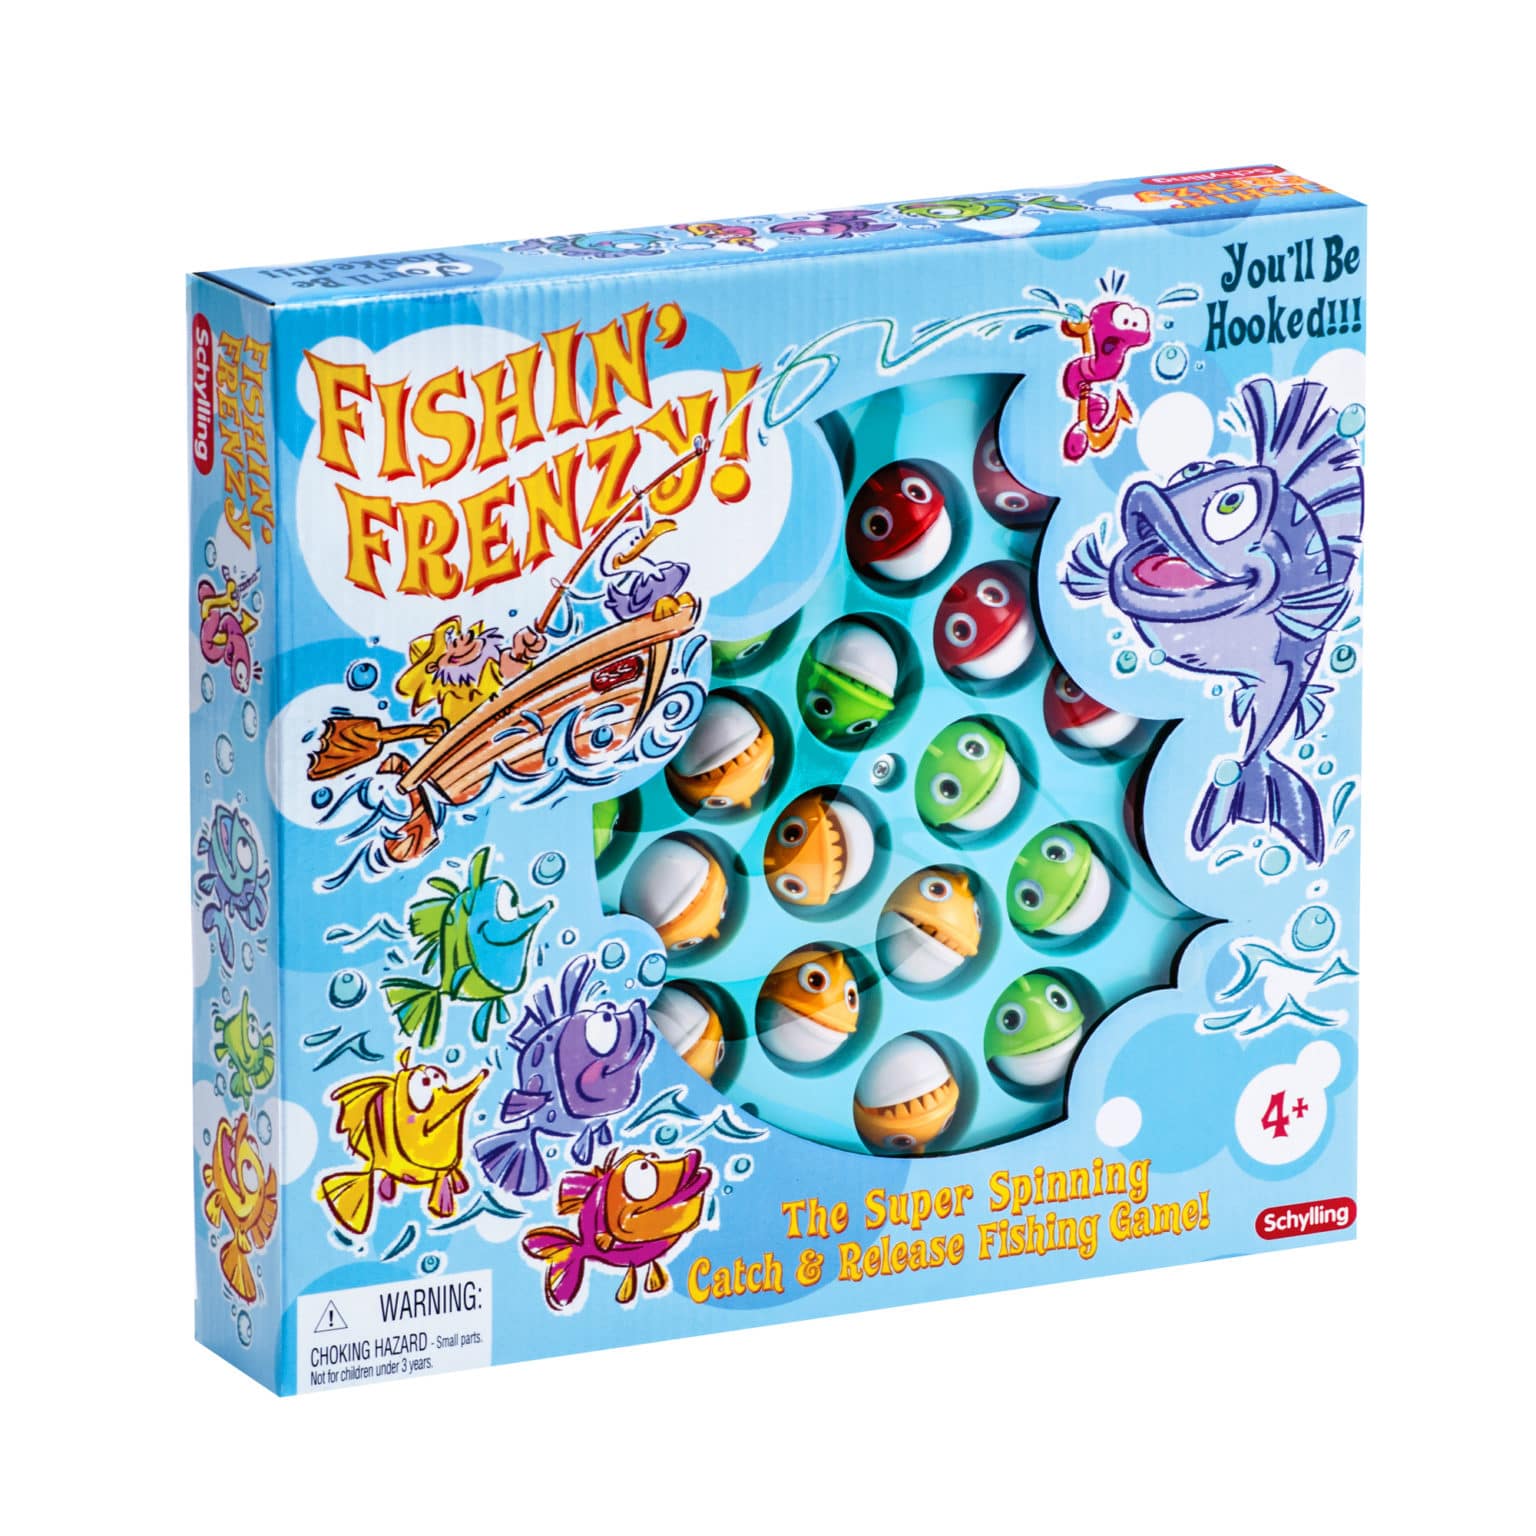 Fishin' Frenzy! - Large Spinning Catch & Release Fishing Game